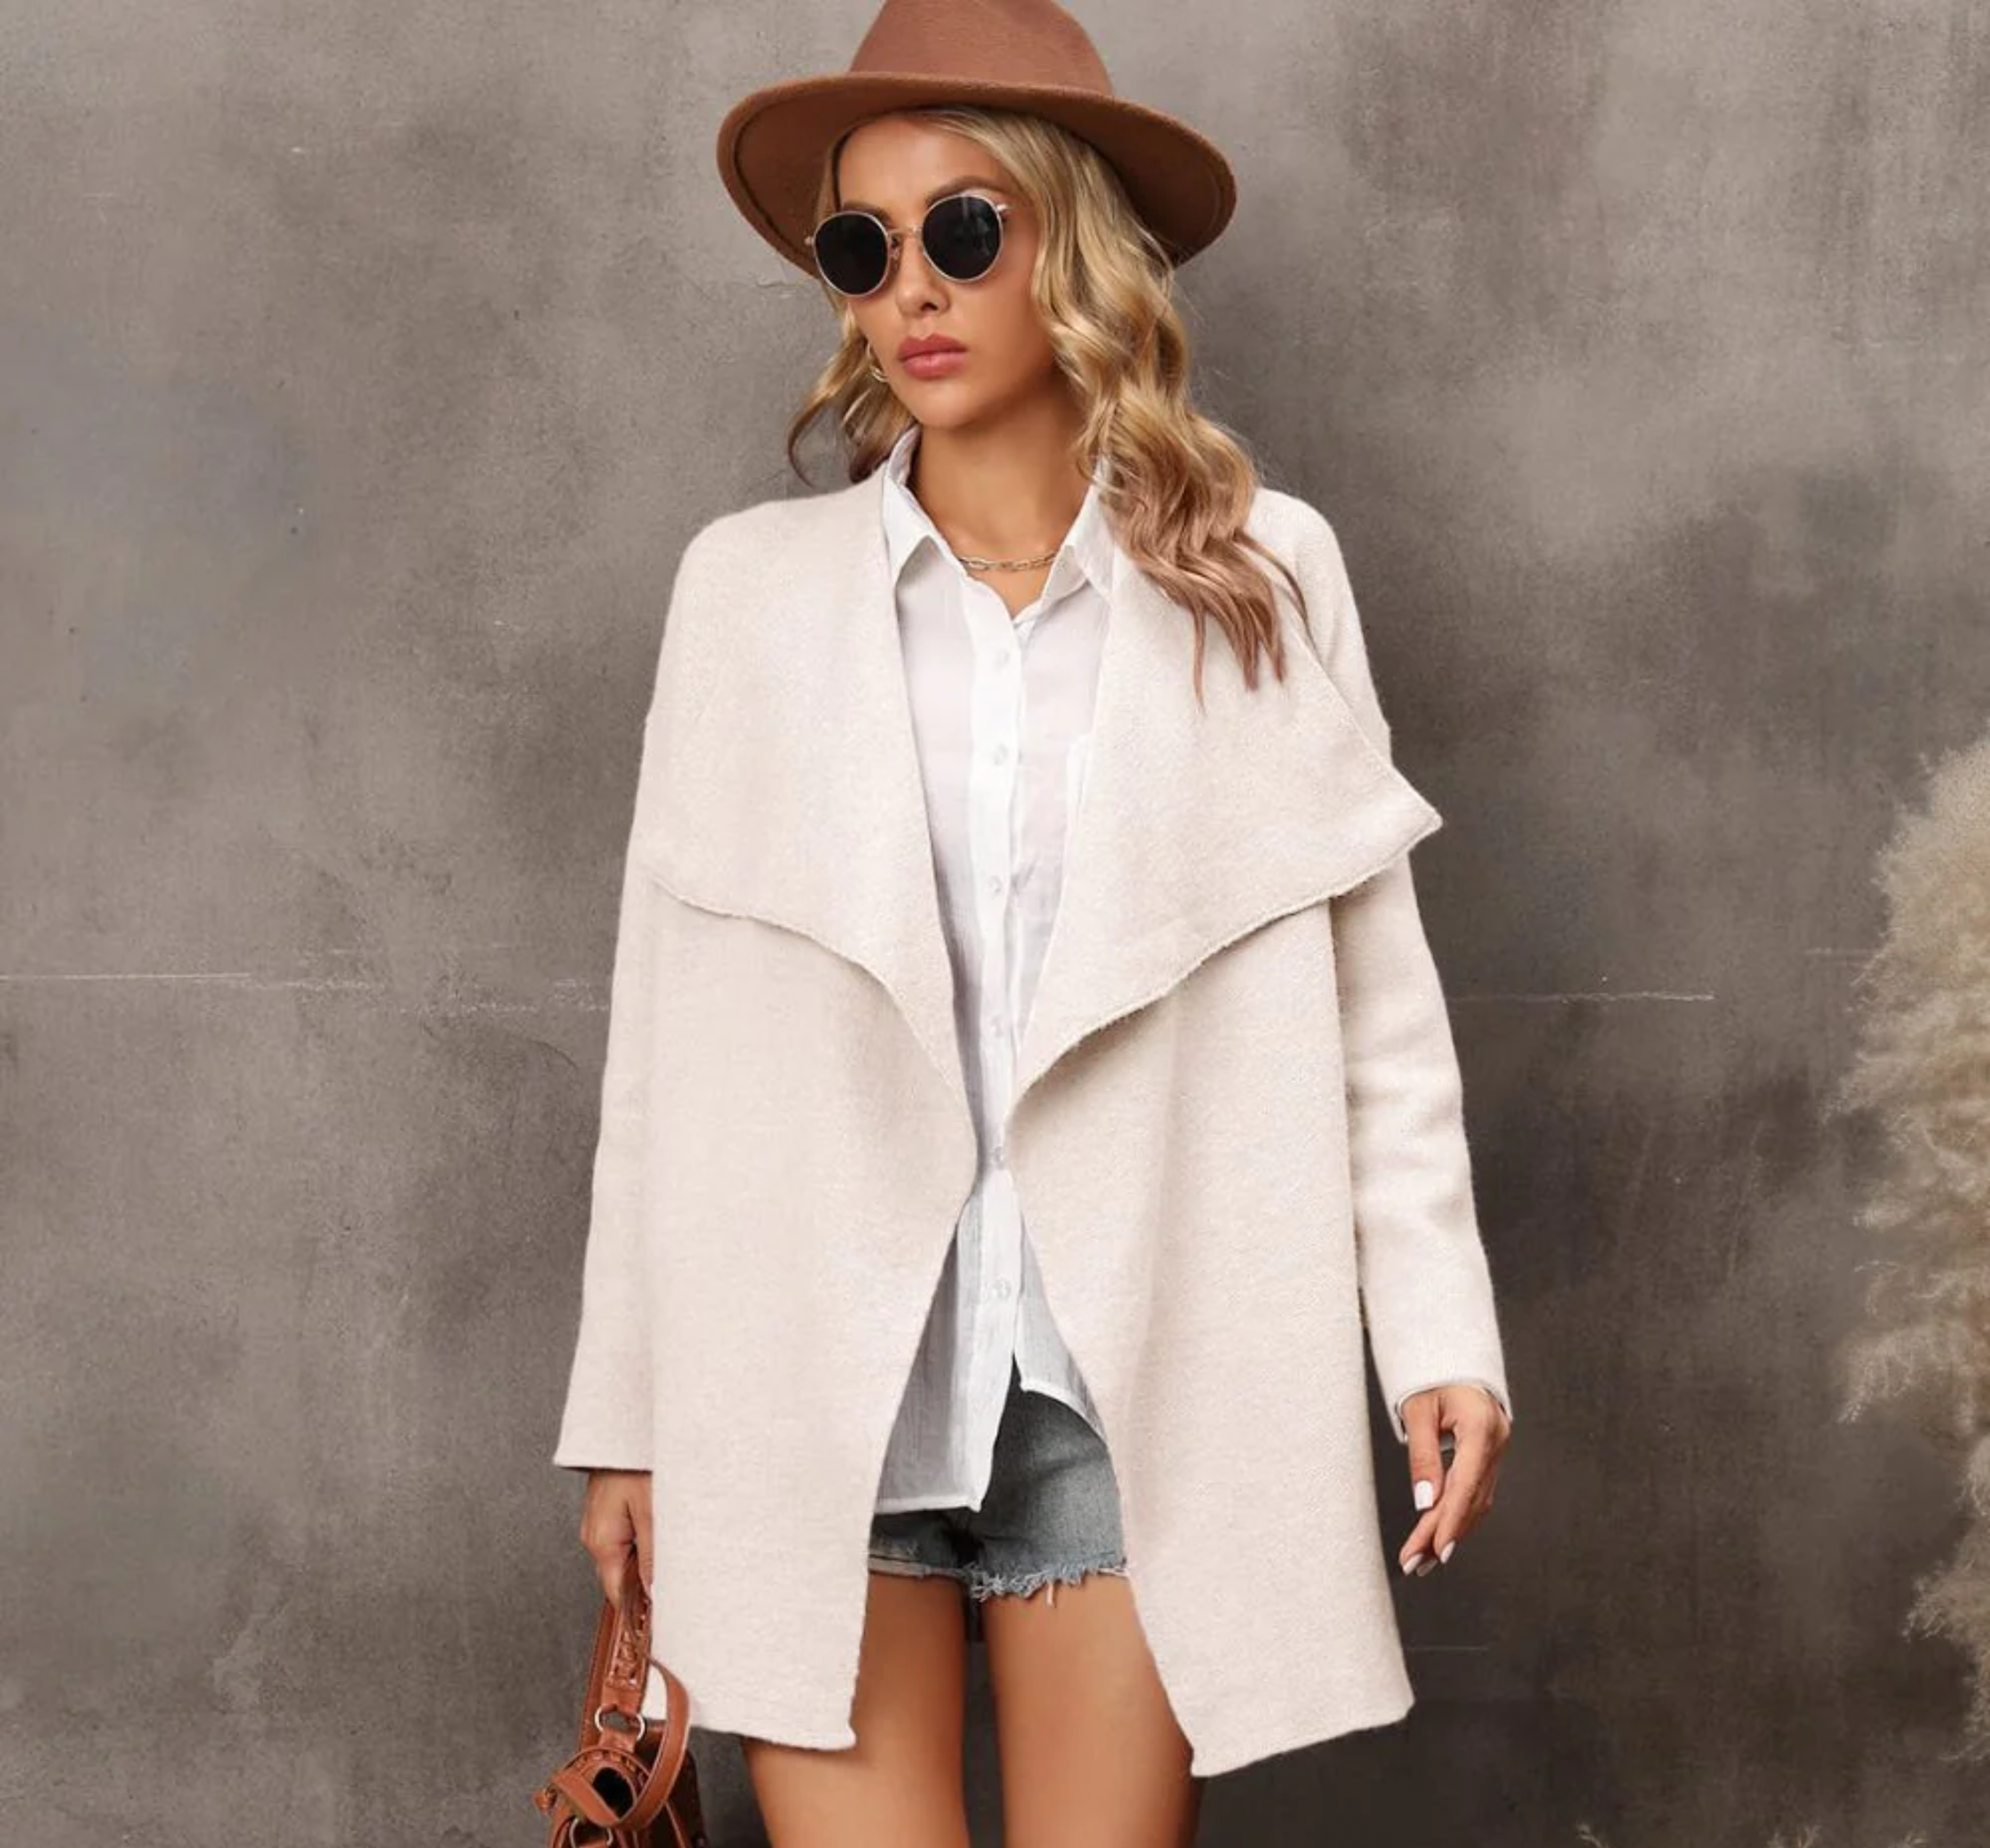 Comfortable Cardigans: How to Style for This Season's Trends